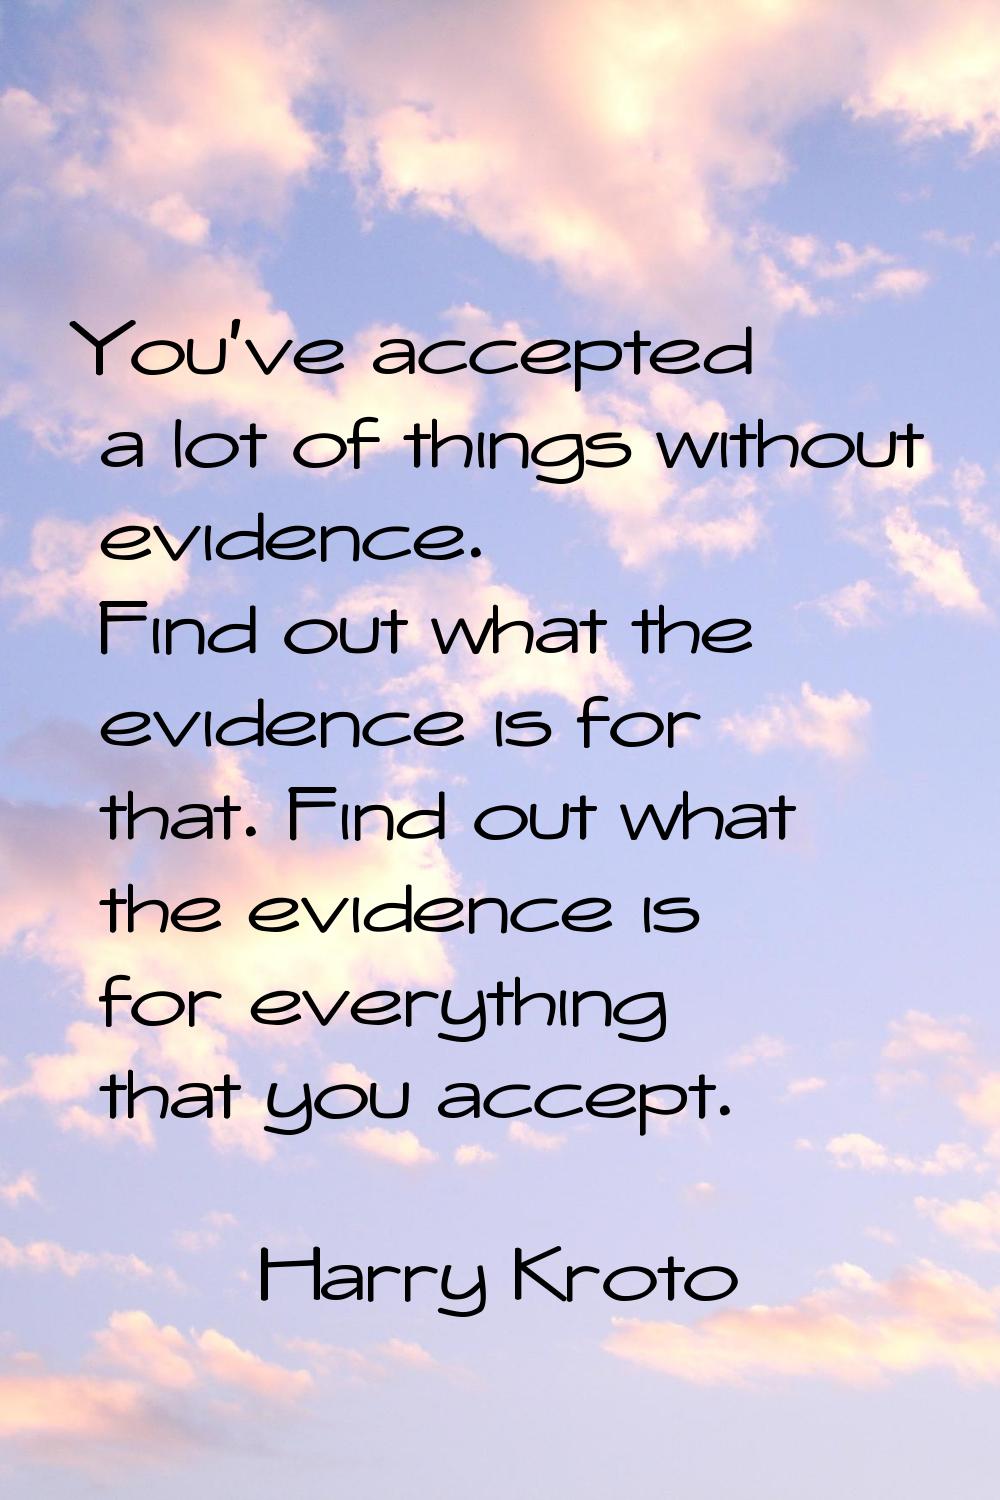 You've accepted a lot of things without evidence. Find out what the evidence is for that. Find out 